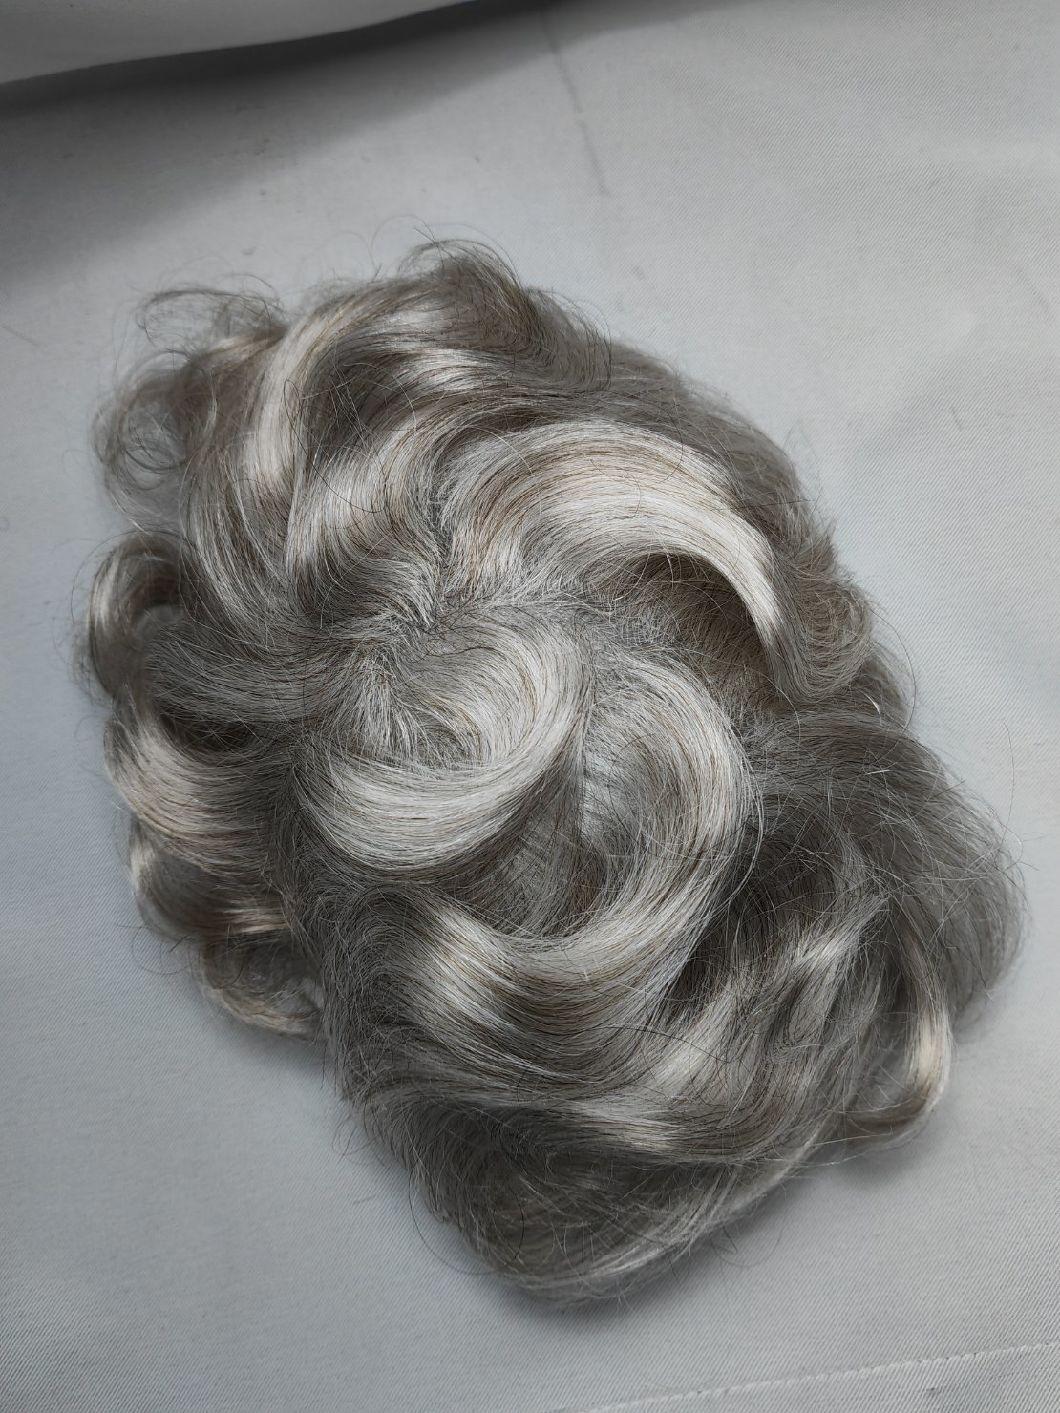 2022 Most Natural Super Thin Poly Human Hairpiece Made of Remy Human Hair (V-Looping)